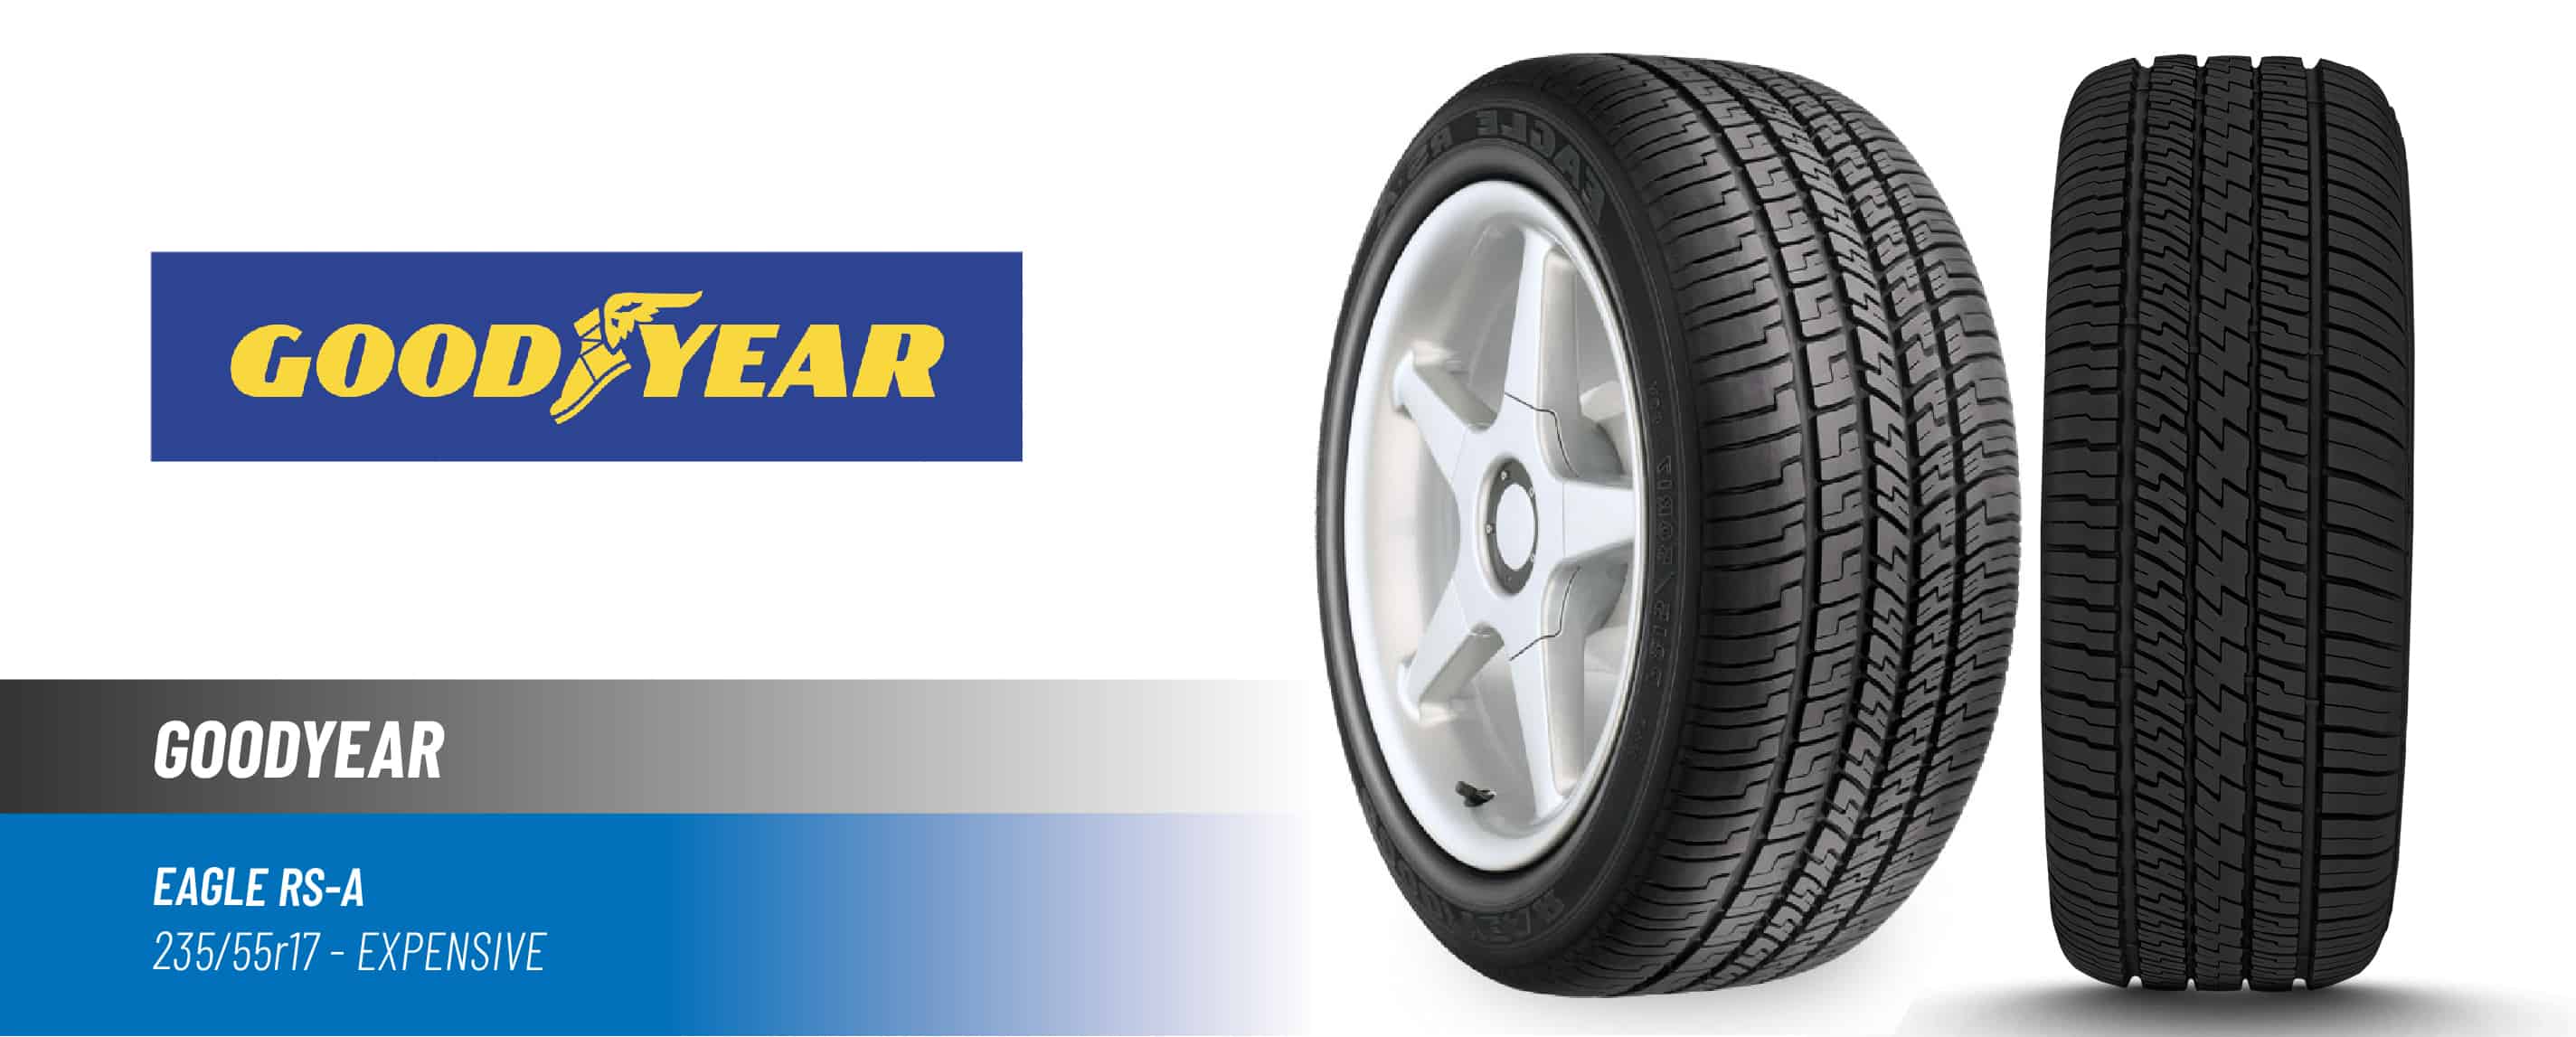 Top#5 High Price: Goodyear Eagle RS-A –best 235/55 R17